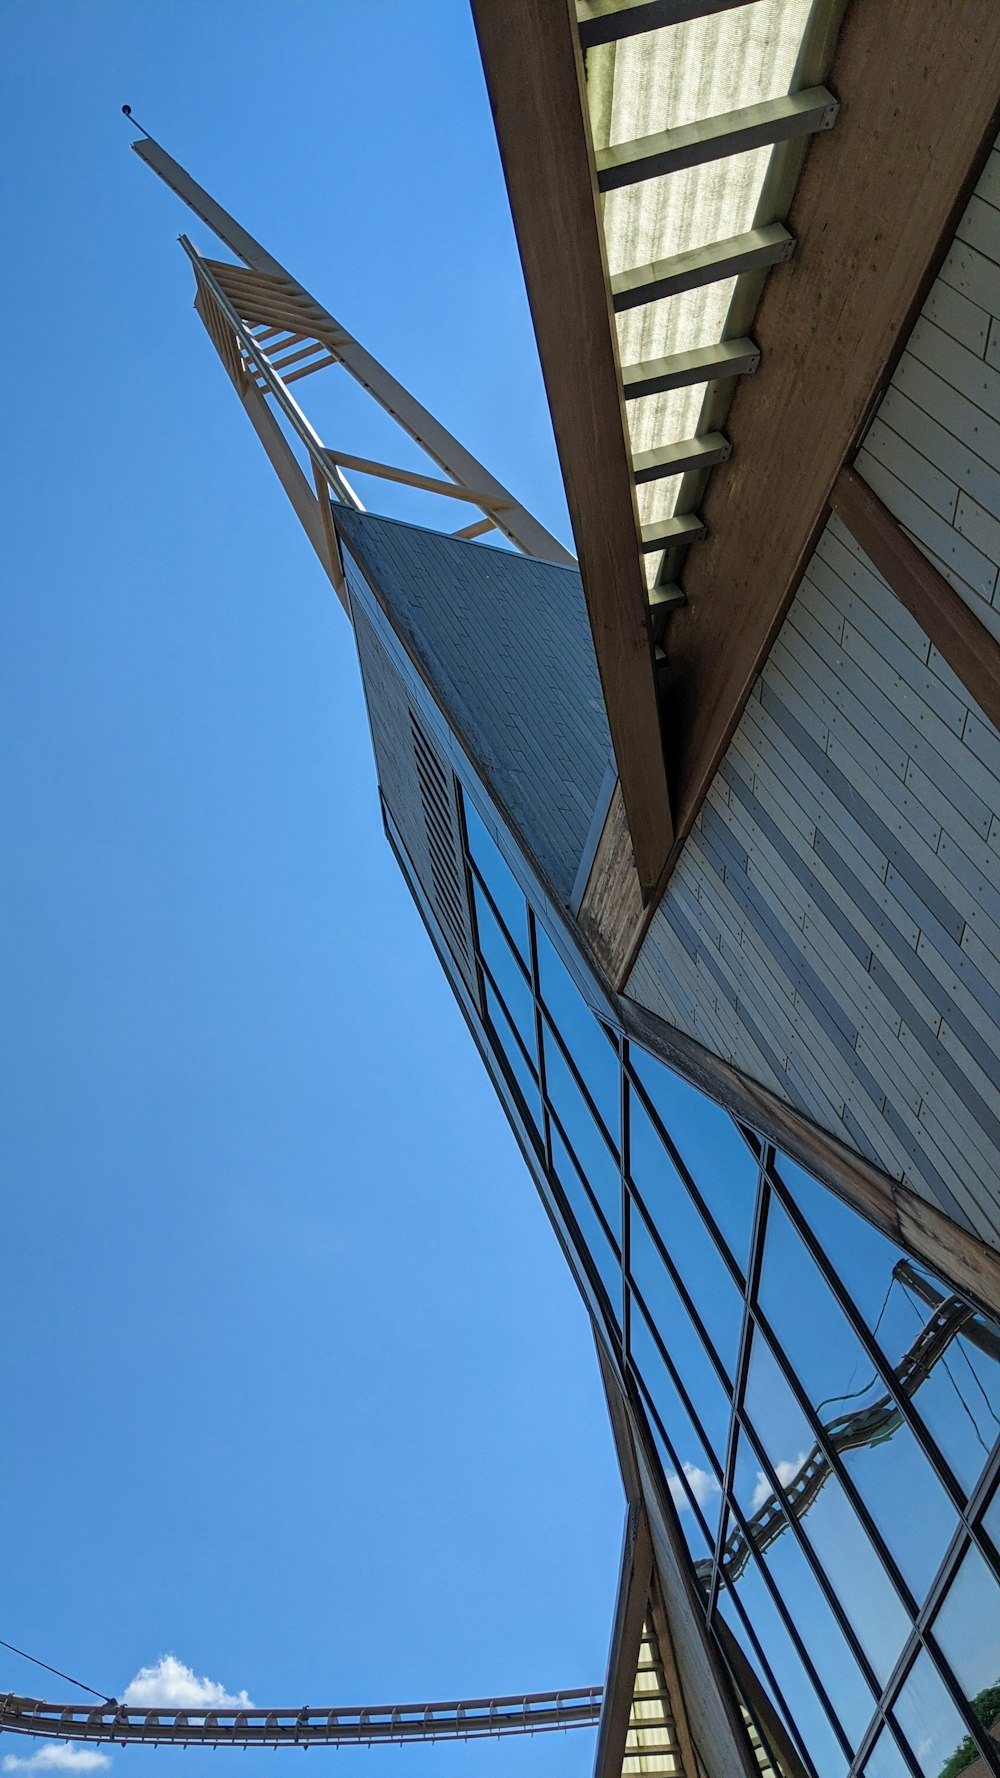 looking up at the roof of a building with a bridge in the background